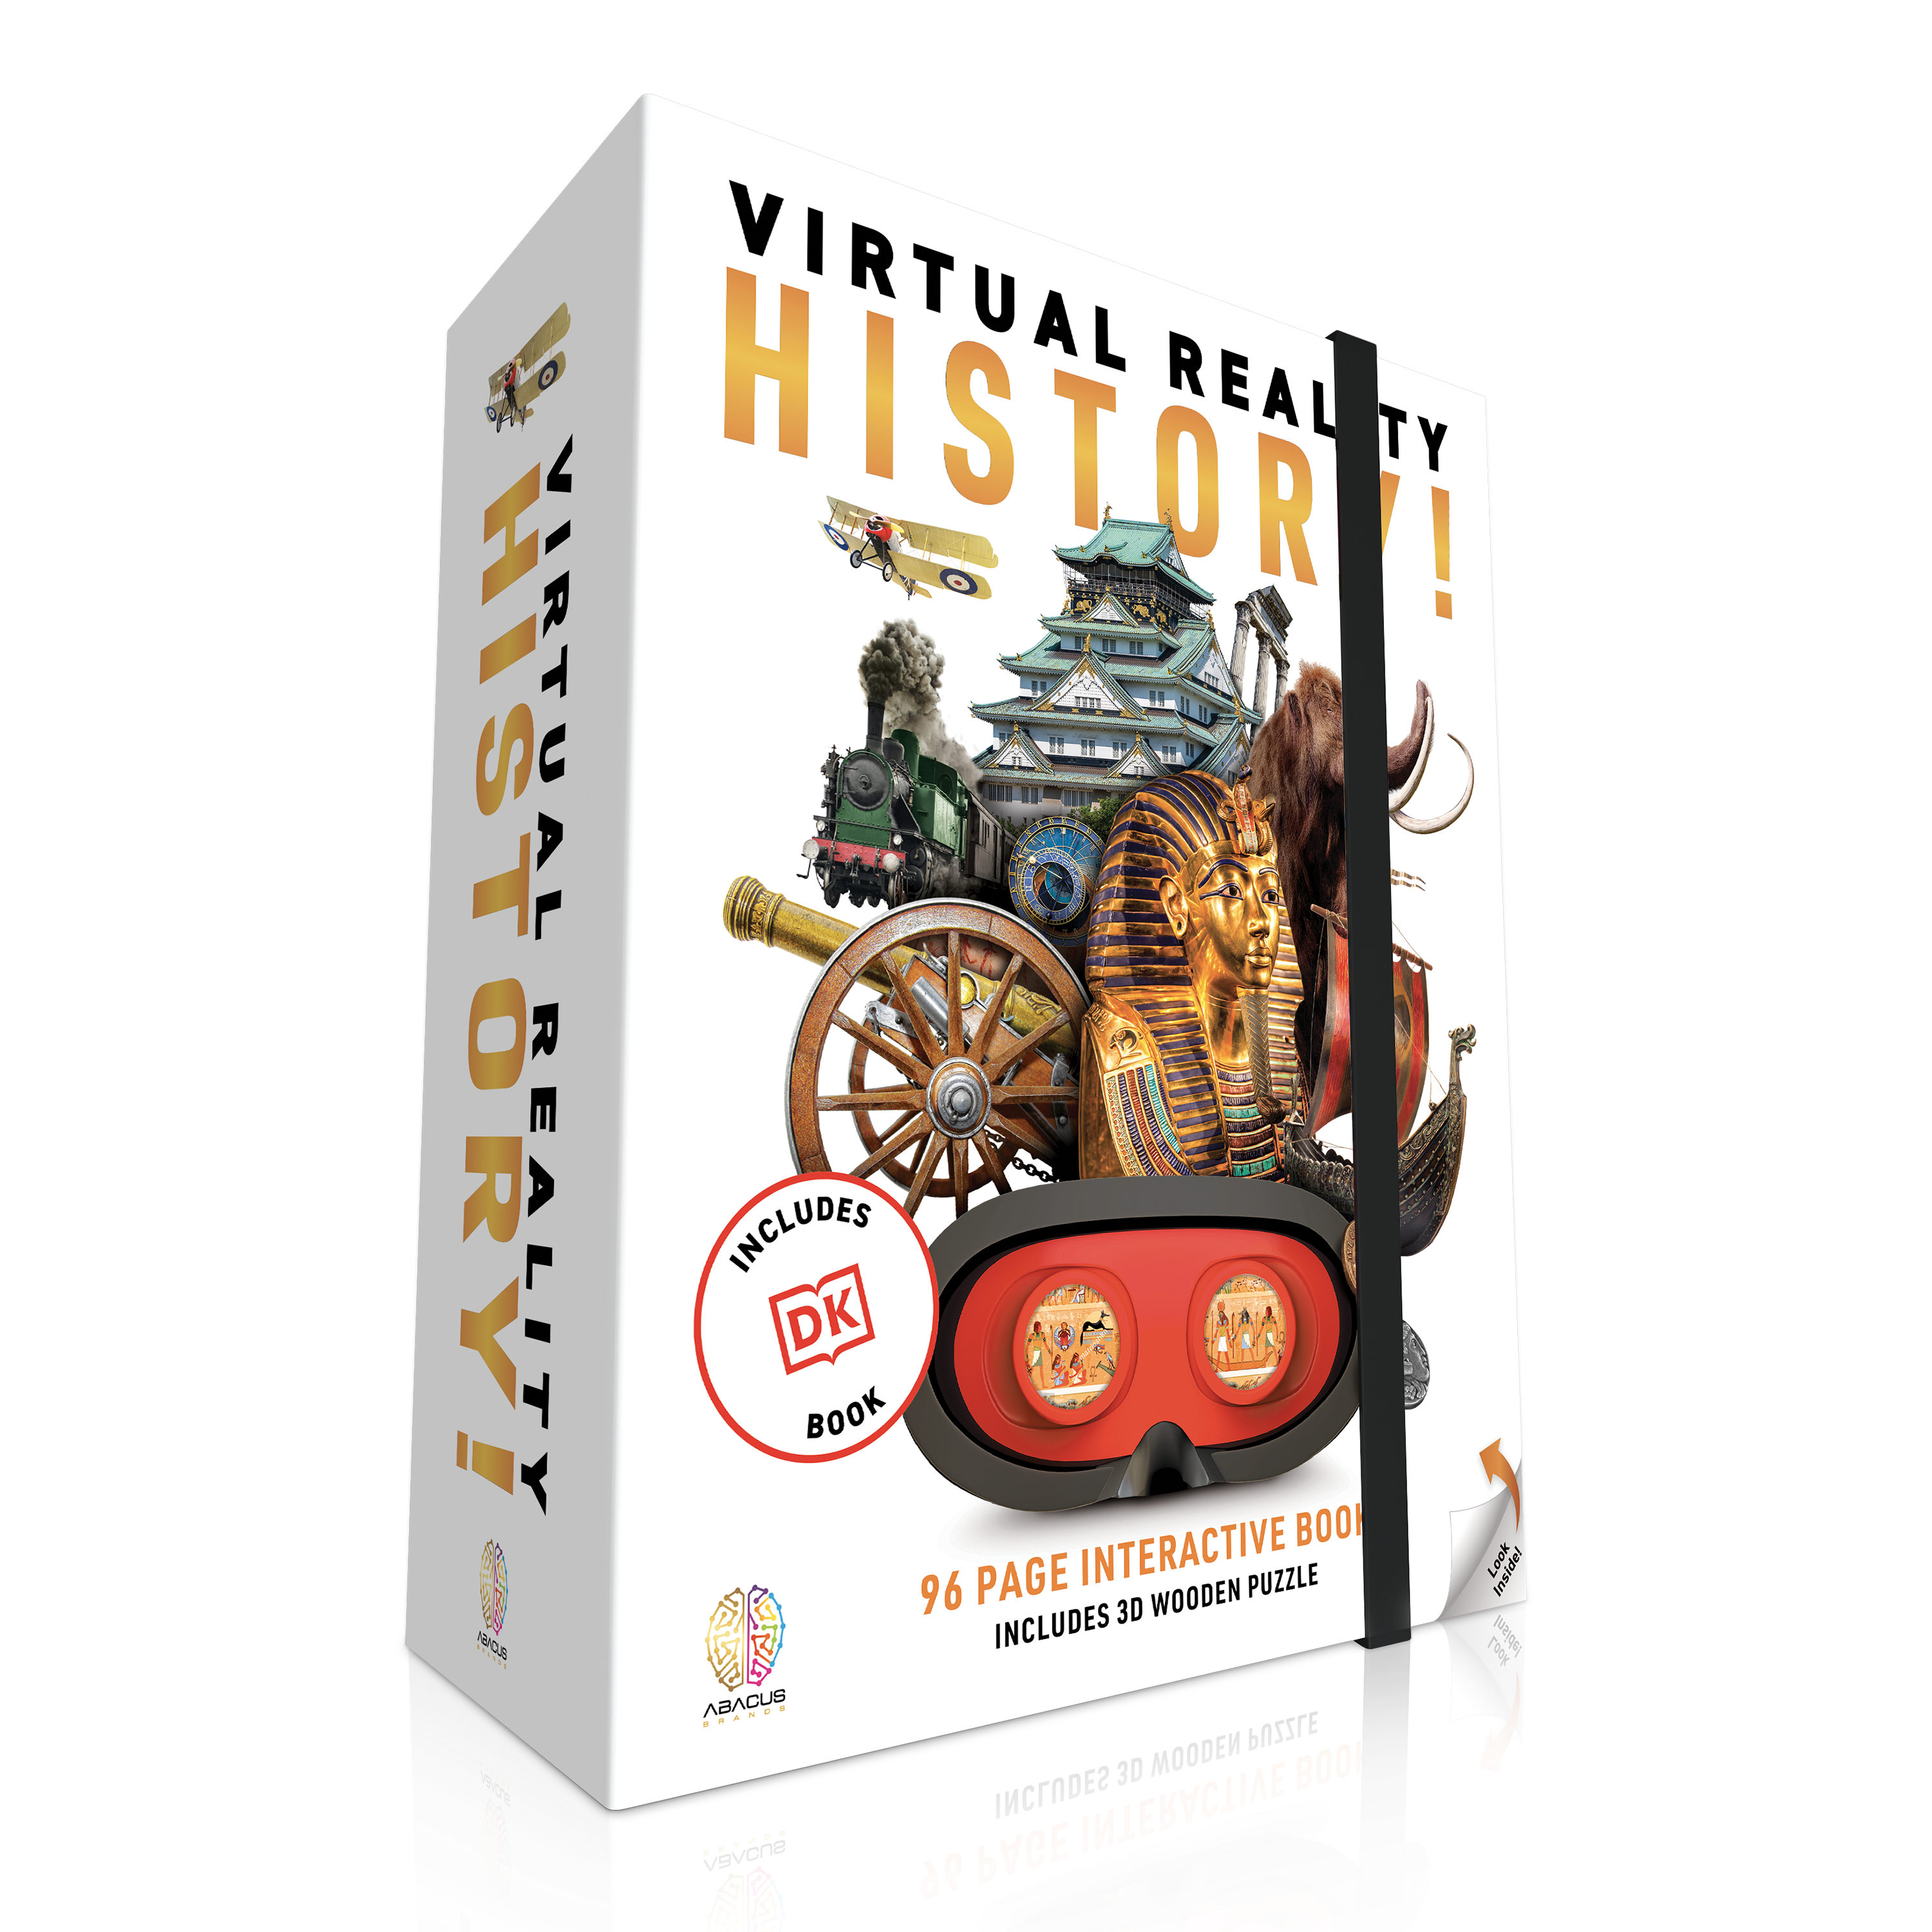 Virtual Reality Discovery Gift Set w/ DK Book - History!